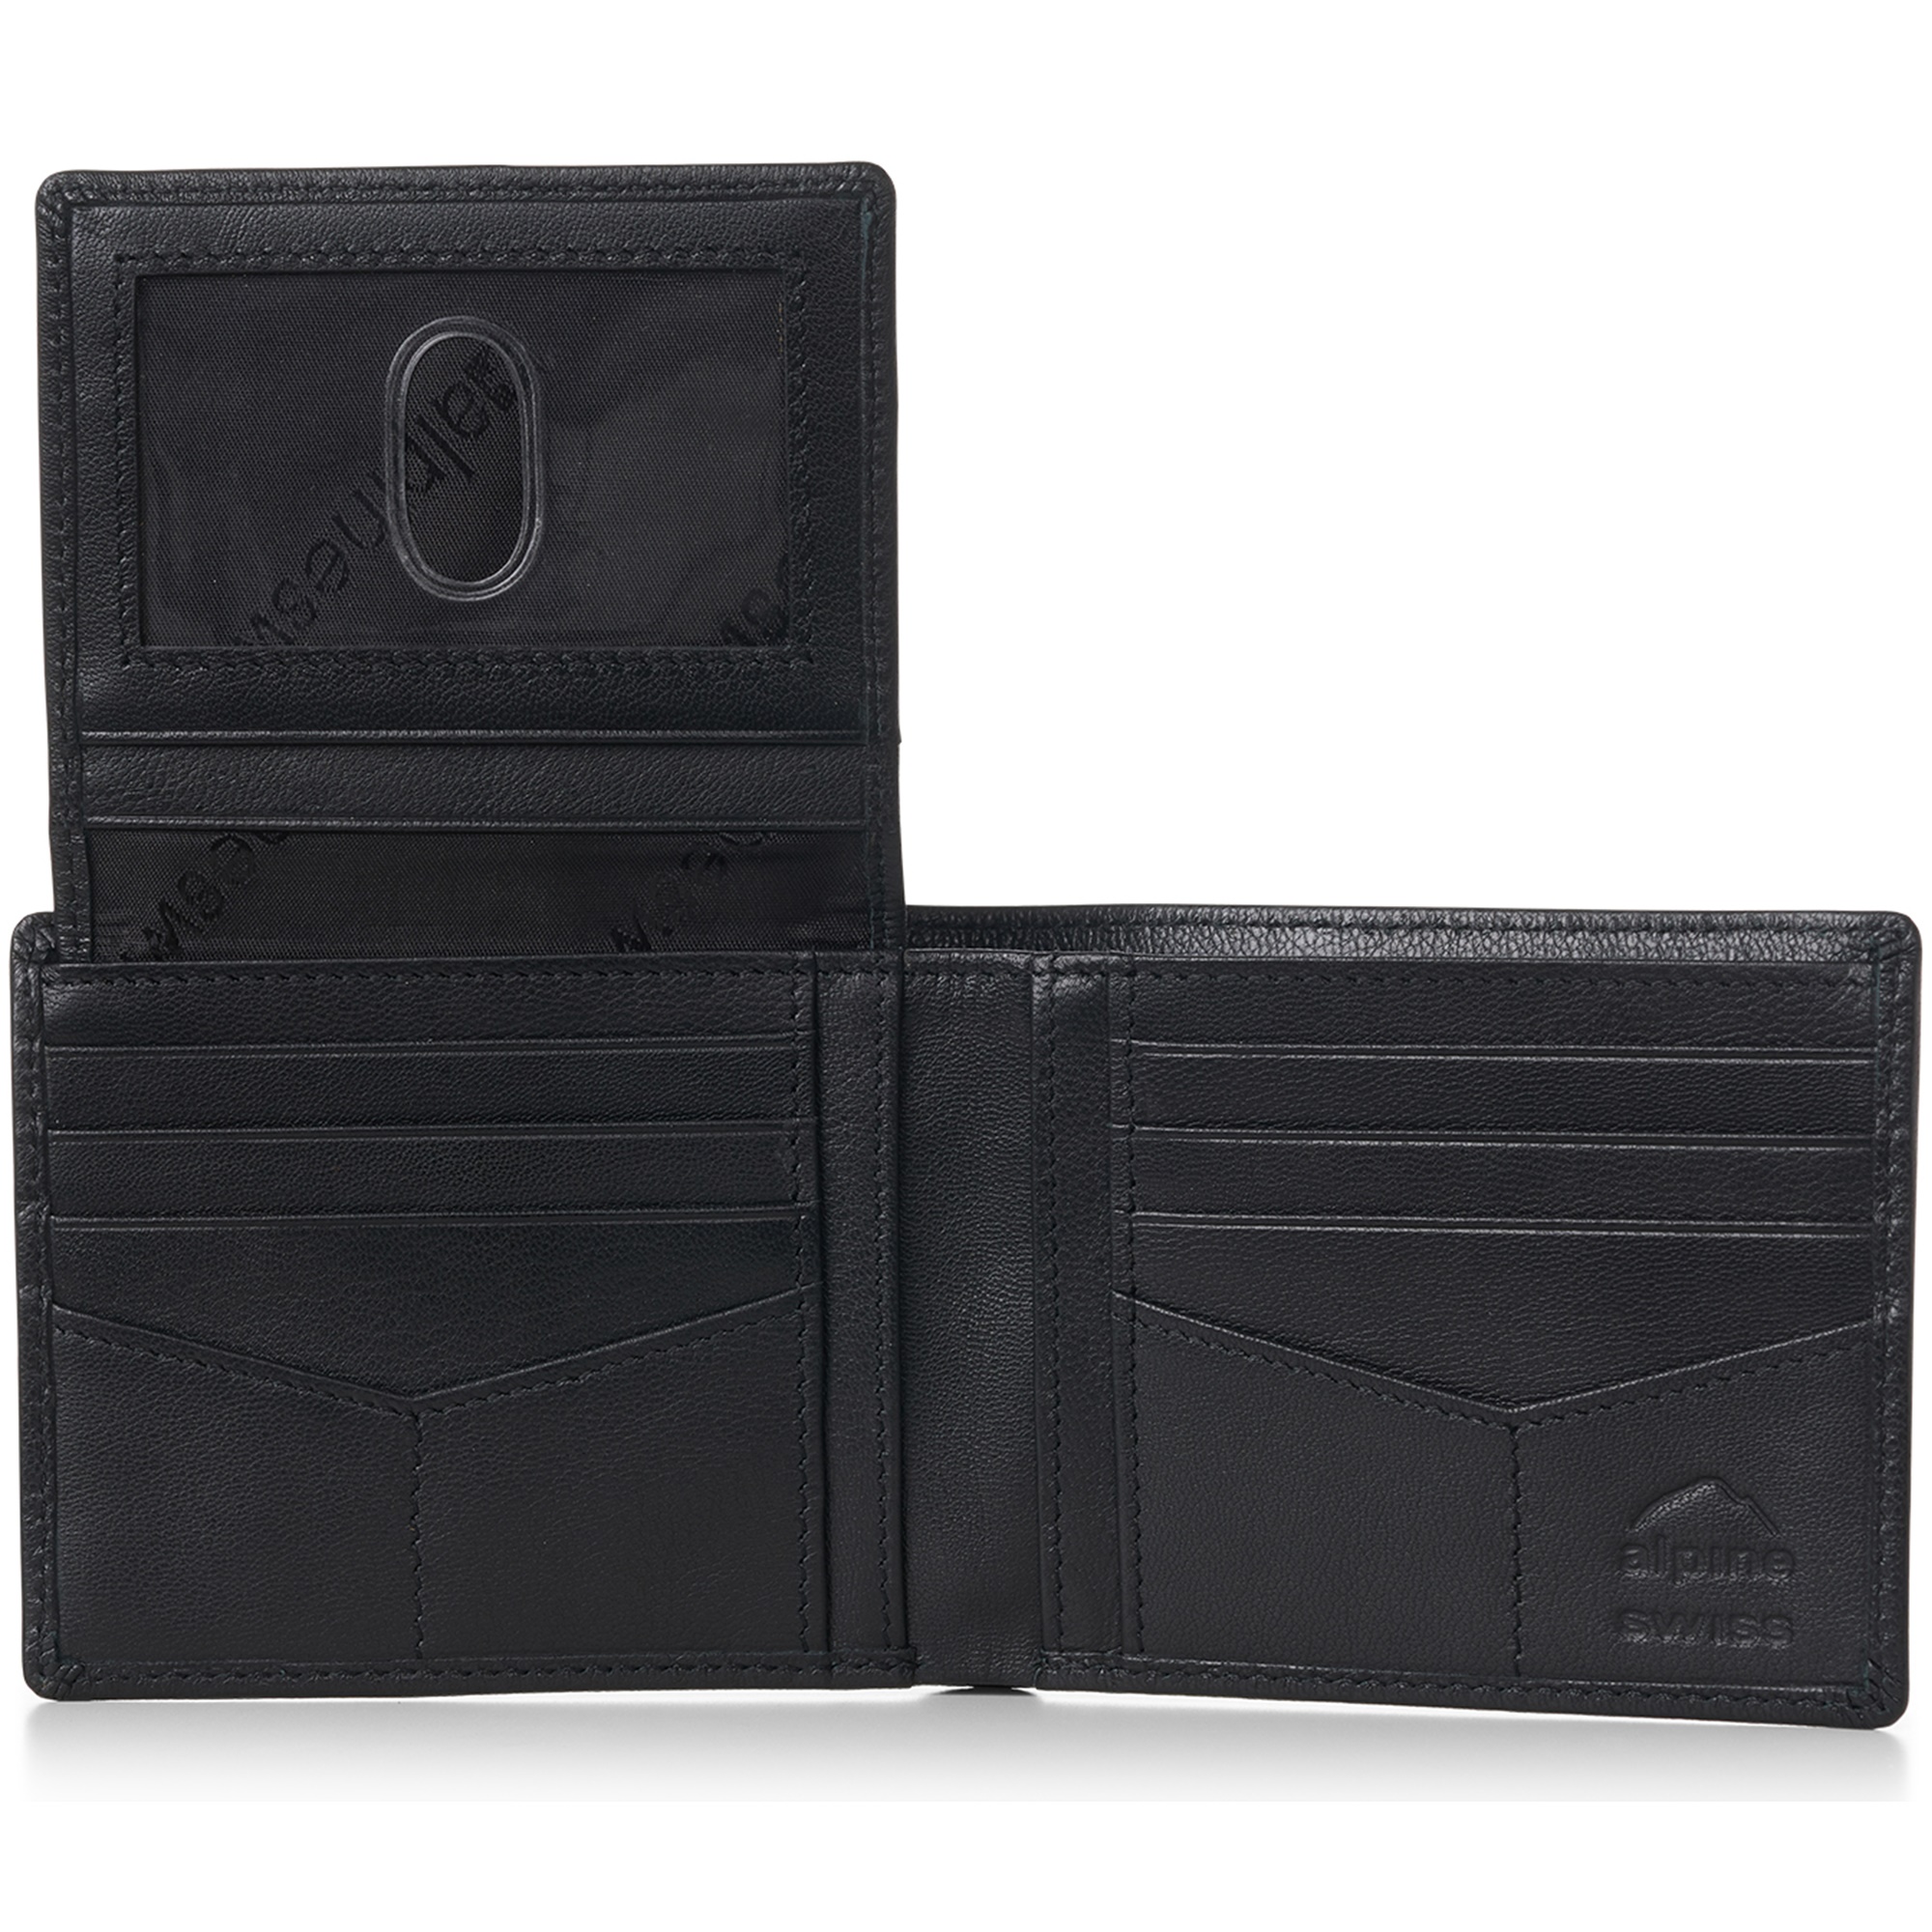 Alpine Swiss RFID Mens Wallet Deluxe Capacity Passcase Bifold Two Bill Sections - image 2 of 3